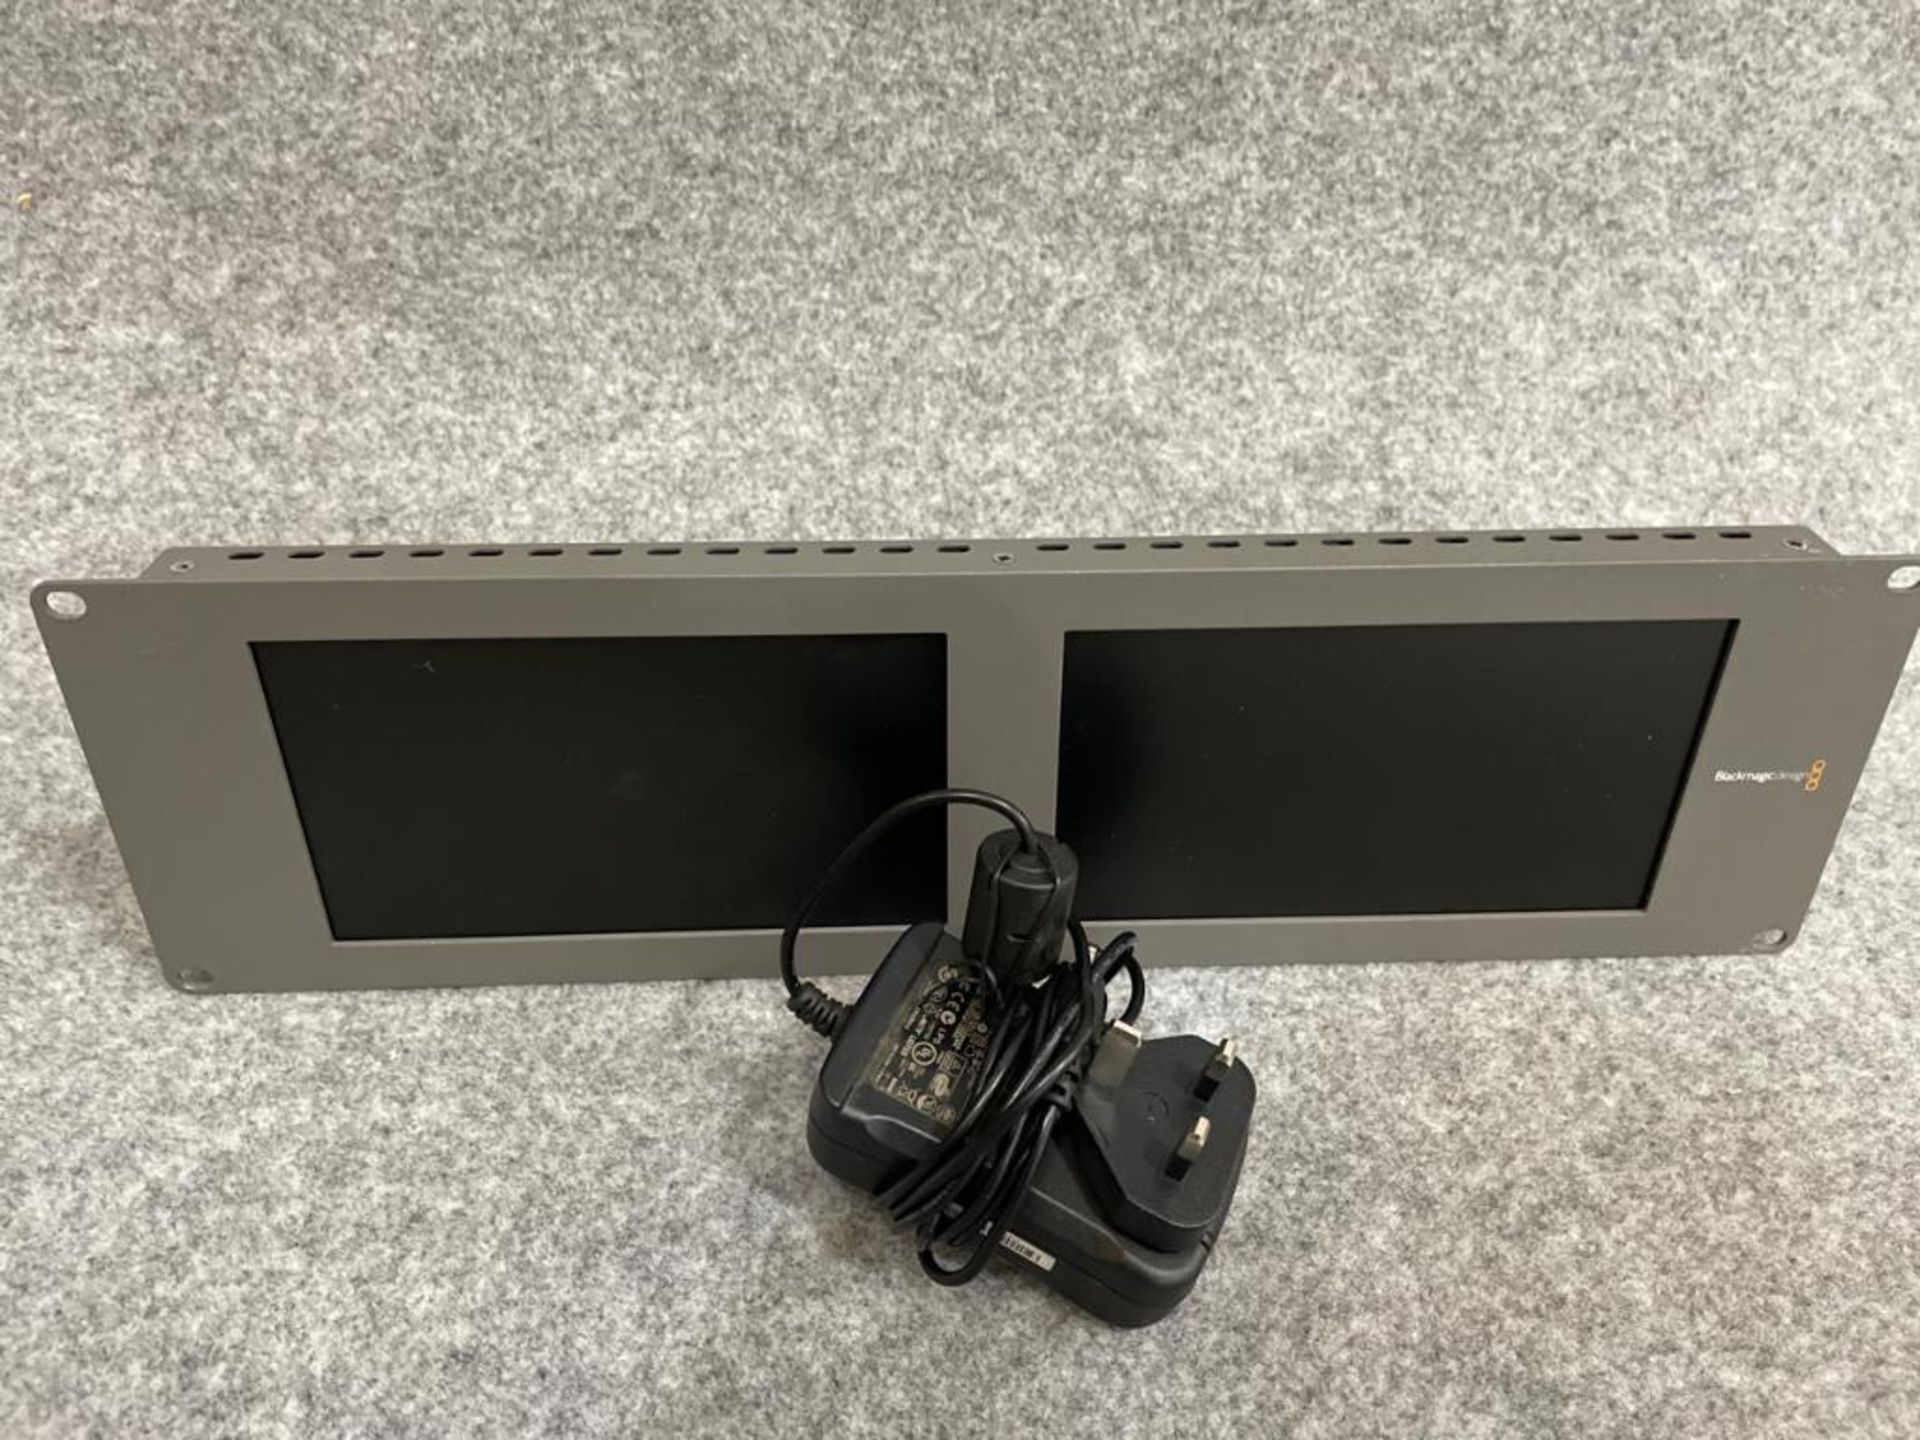 BlackMagic Dual HD Monitor with power supply SN: 1391858 - Image 3 of 3